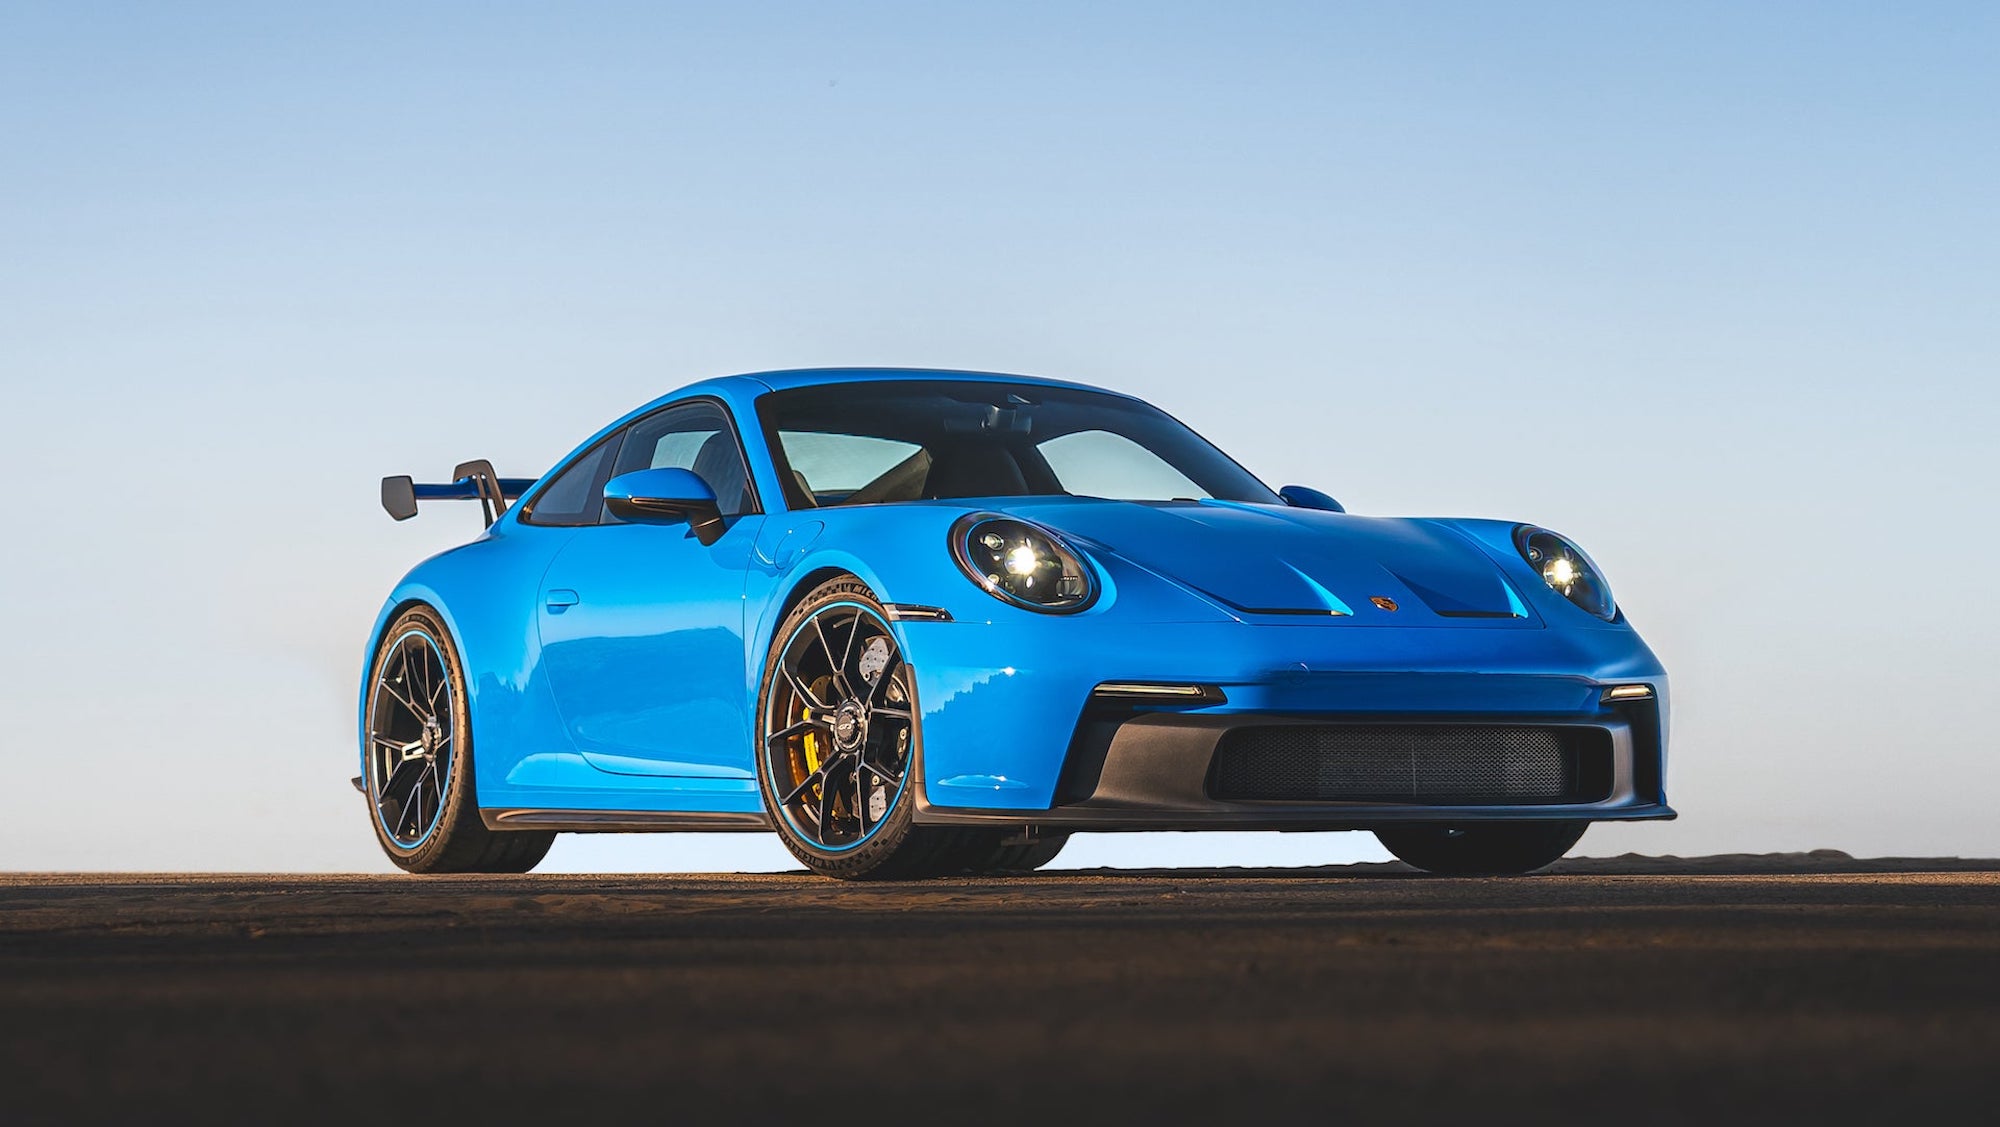 2022 Porsche 911 GT3 in Shark Blue parked on the race track